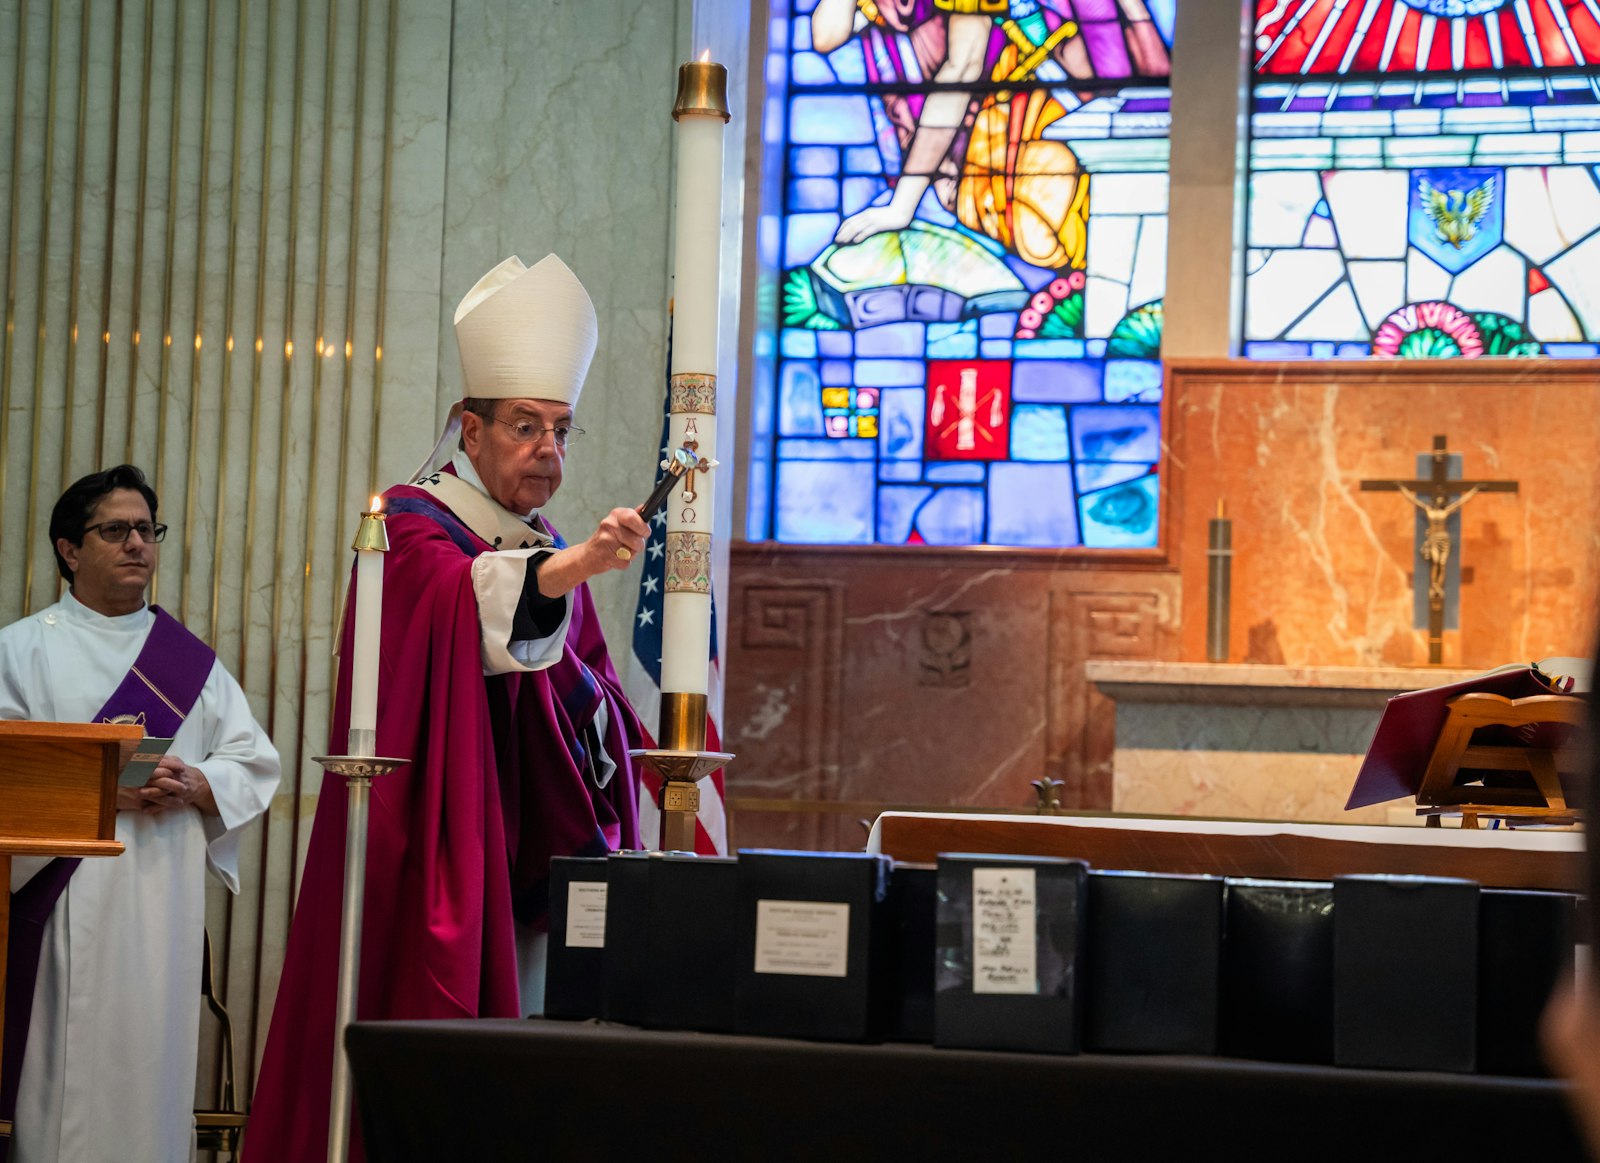 Archbishop Vigneron blesses cremated remains brought to the cemetery as part of the Church's "Gather Them Home" initiative, which invites families to bring their loved ones to be buried at no cost.